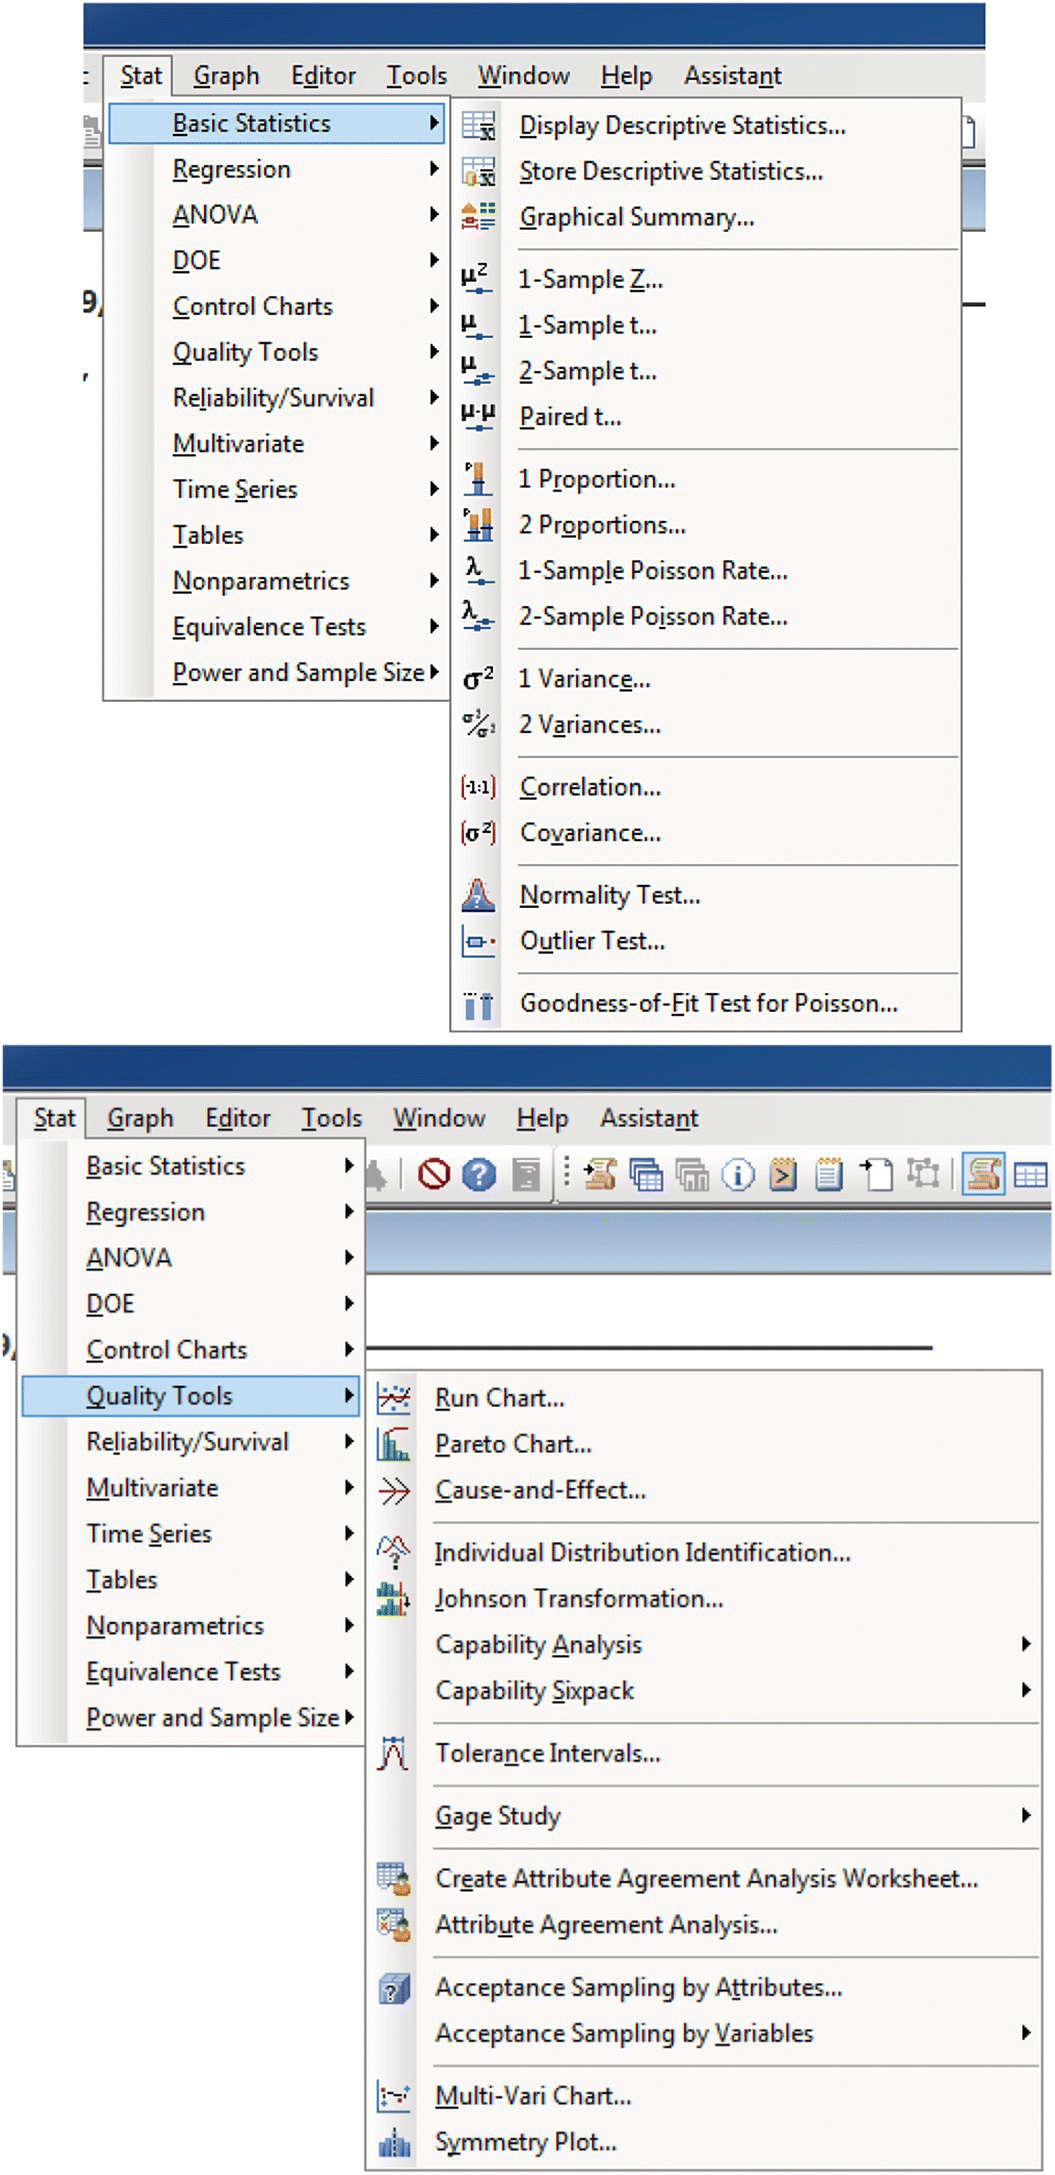 Two snipped images displaying menu options for Basic Statistics (top) and Quality Tools (bottom) under Stat menu.